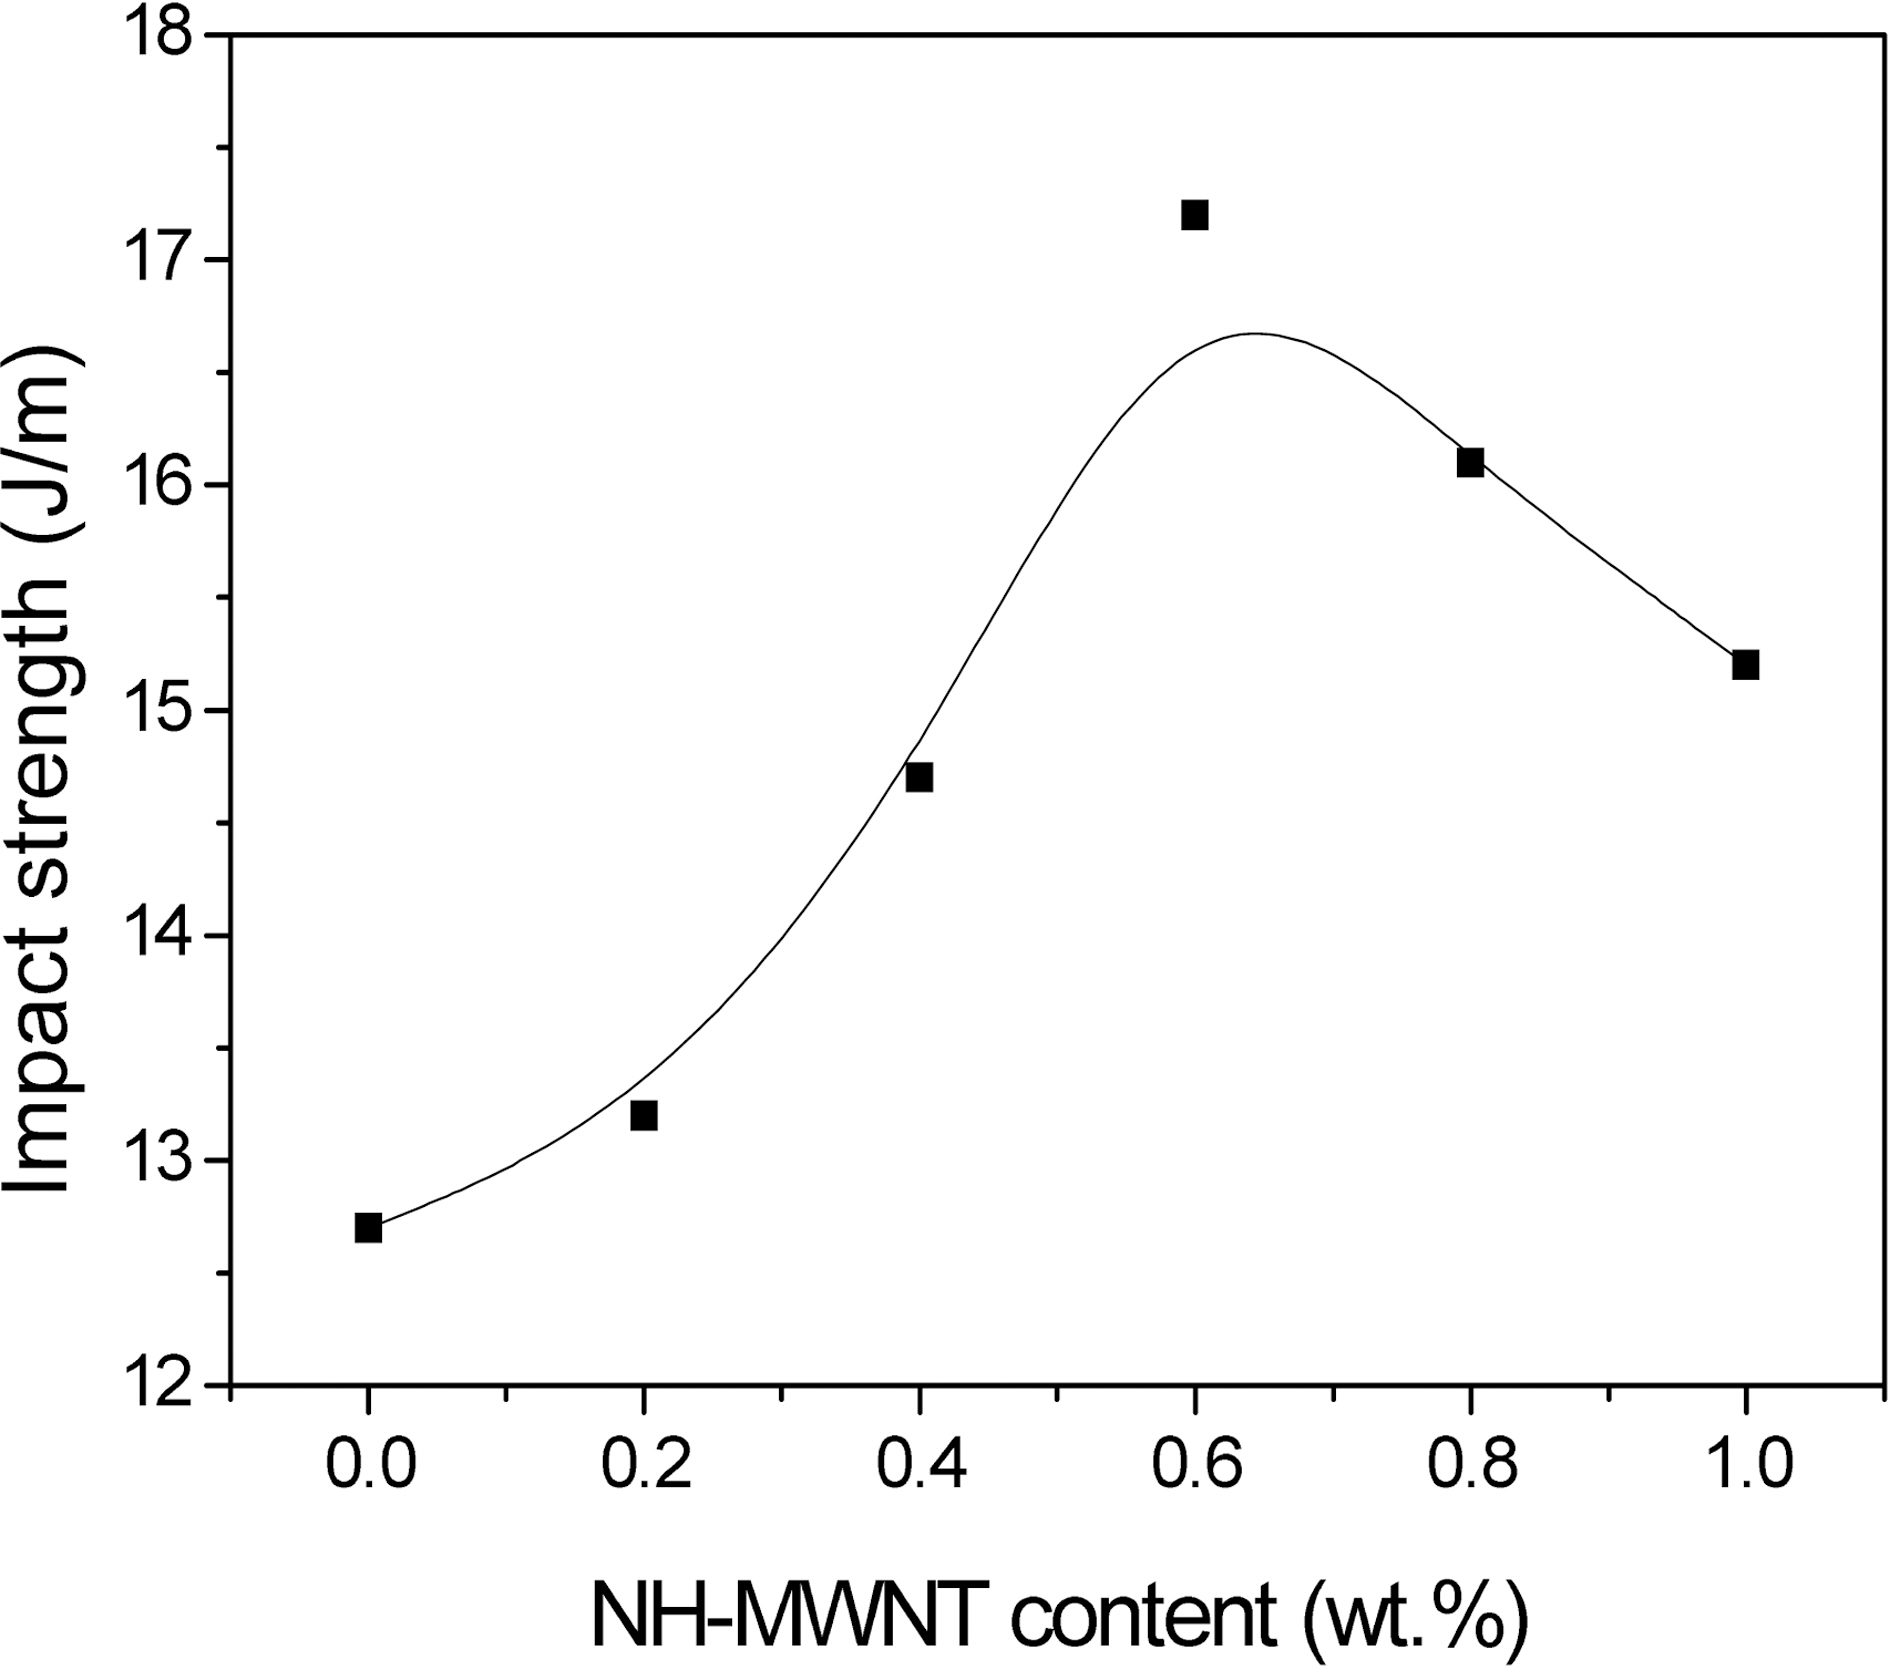 Impact strength of the epoxy nanocomposites with different NH-MWNT contents.